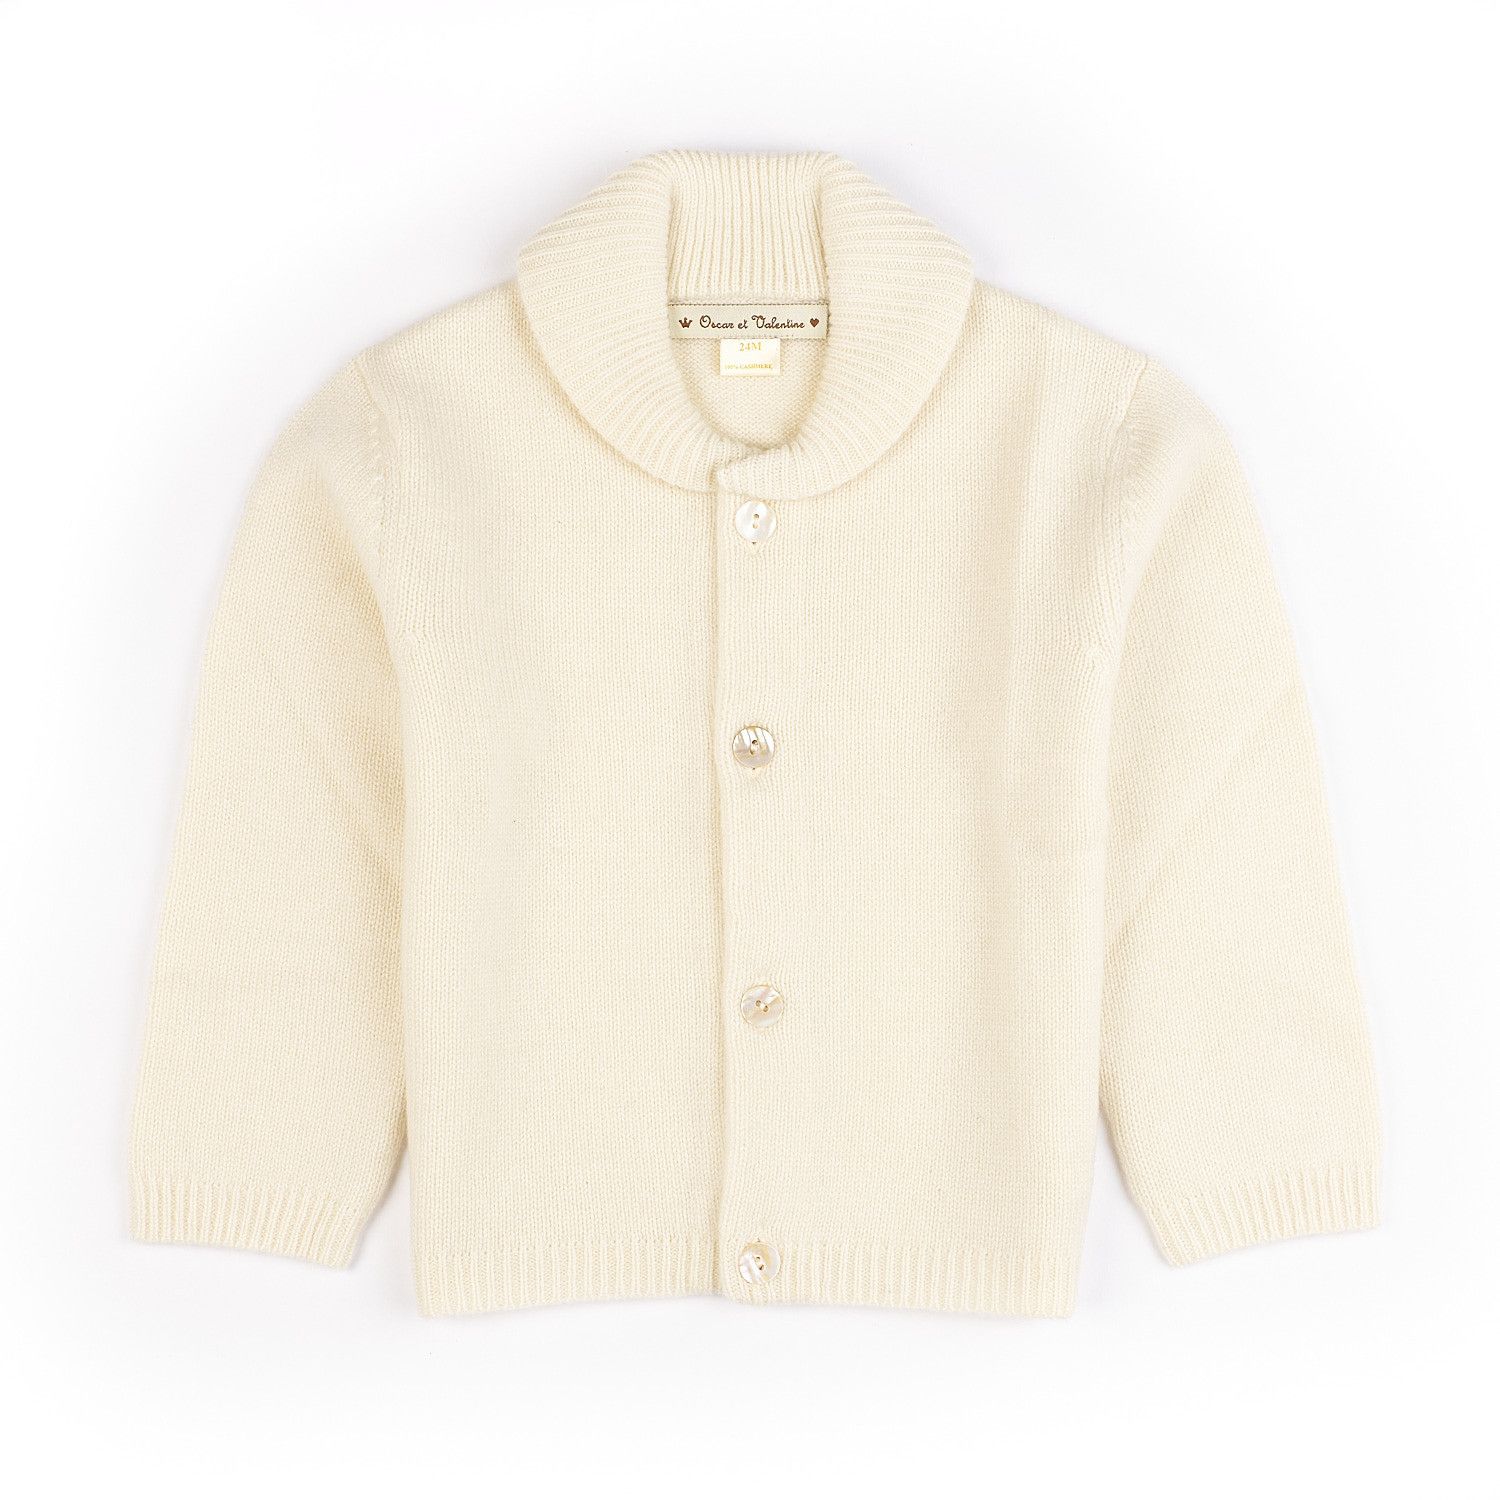 100% cashmere clothes for Baby Girl from 0 to 24 months